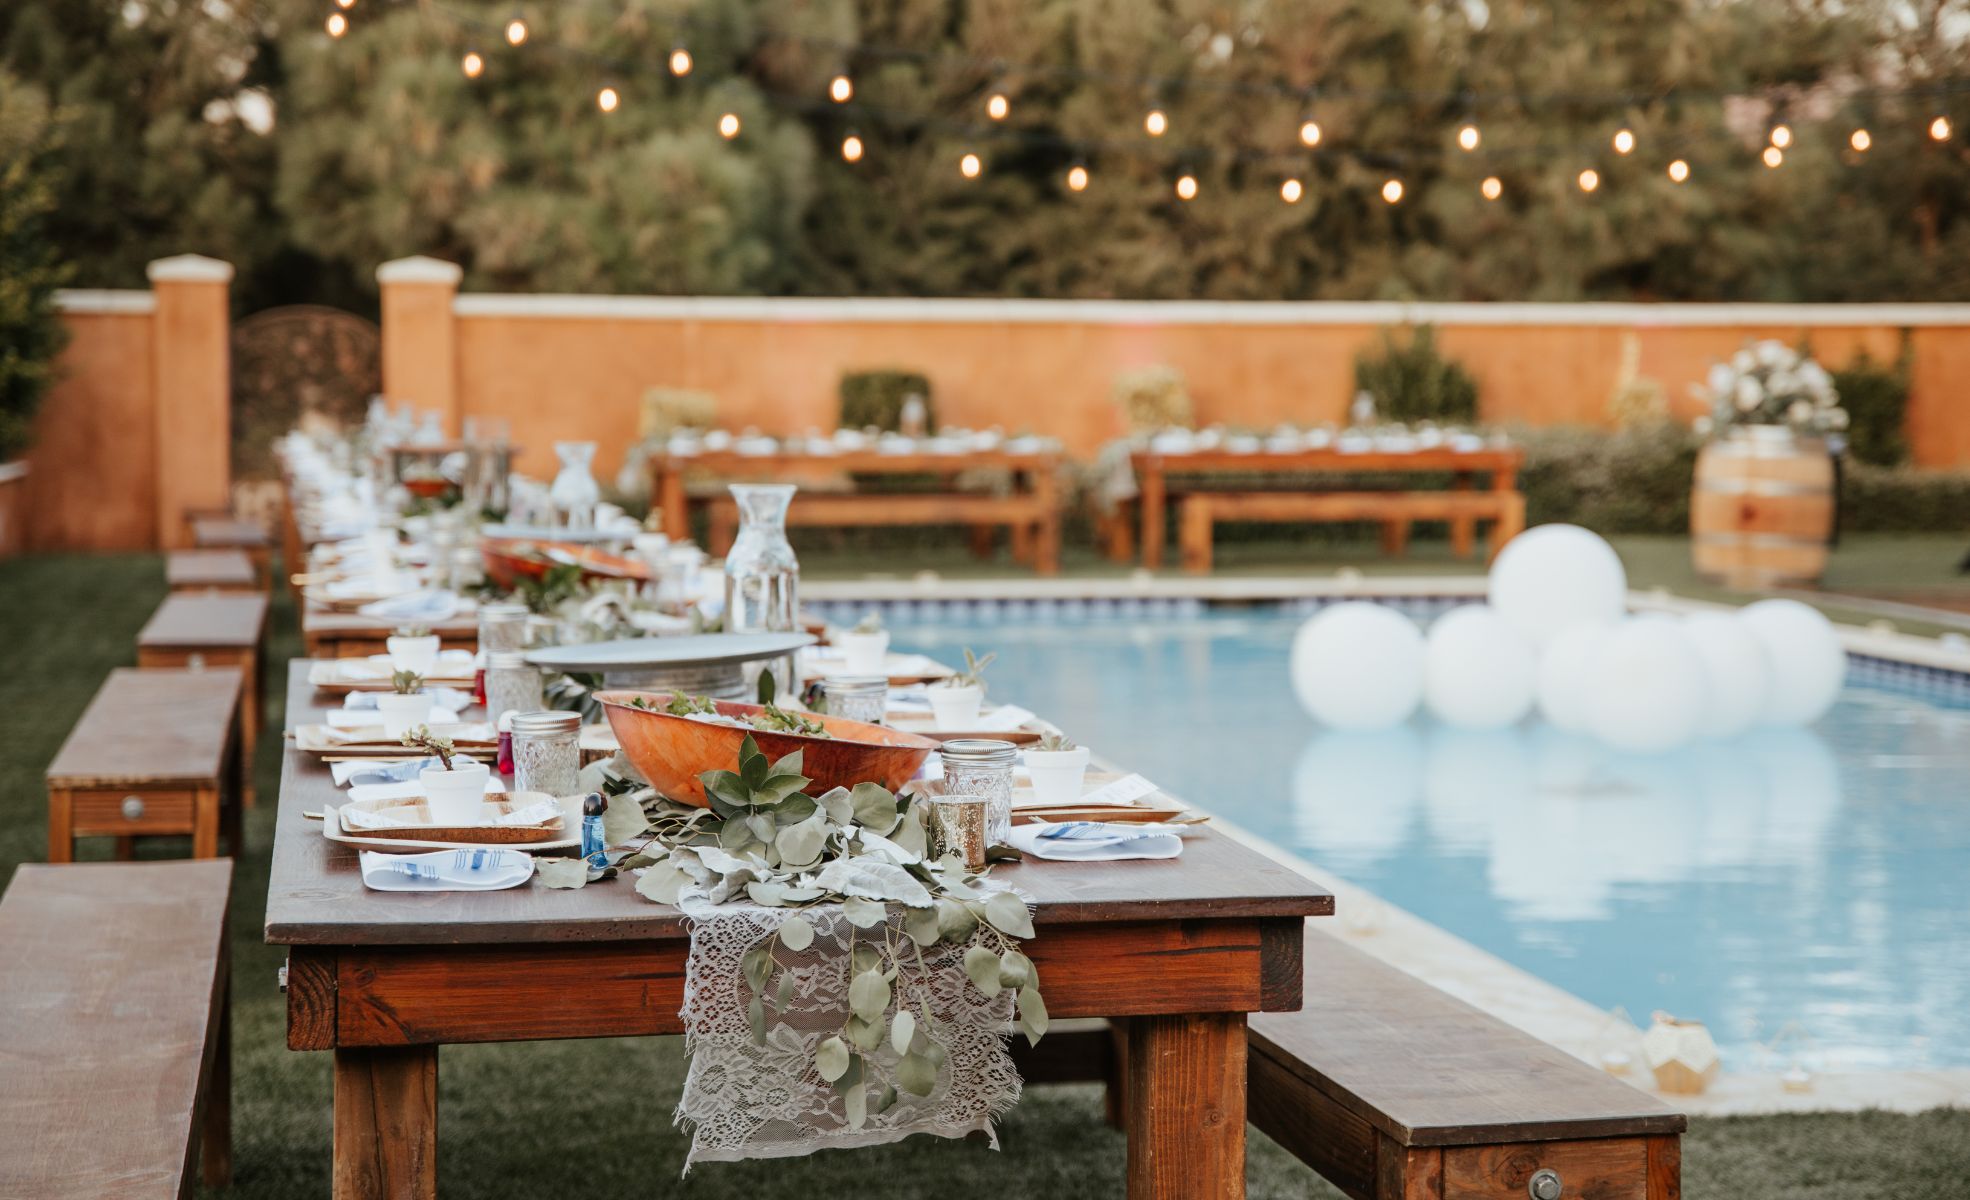 Outdoor Party Setup Next To Pool